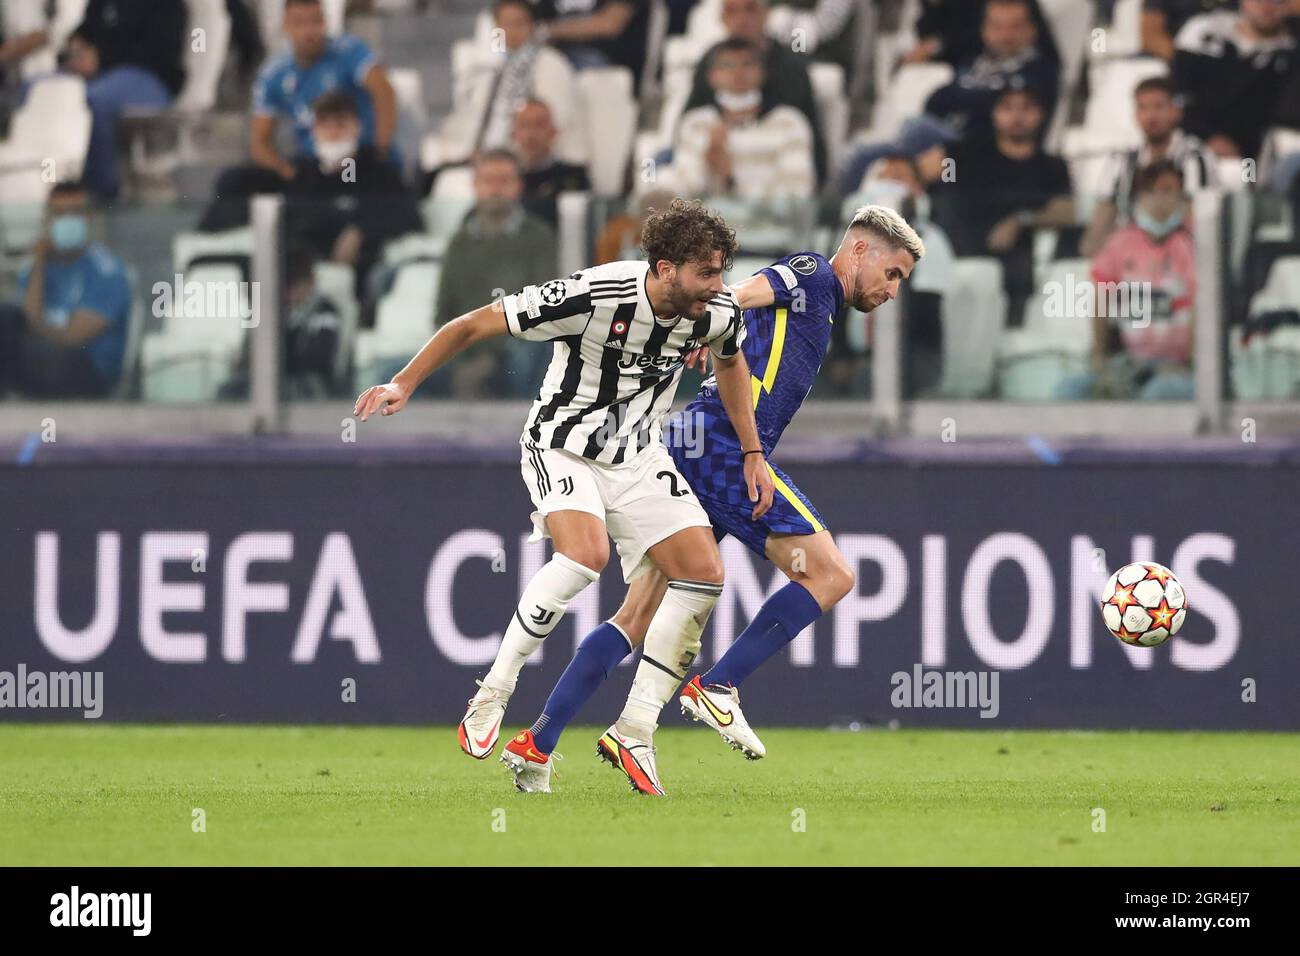 Turin, Italy. 29th Sep, 2021. Italy Nationsl team colleagues Manuel Locatelli of Juventus and Jorginho of Chelsea FC battle for possession during the UEFA Champions League match at Allianz Stadium, Turin. Picture credit should read: Jonathan Moscrop/Sportimage Credit: Sportimage/Alamy Live News Stock Photo